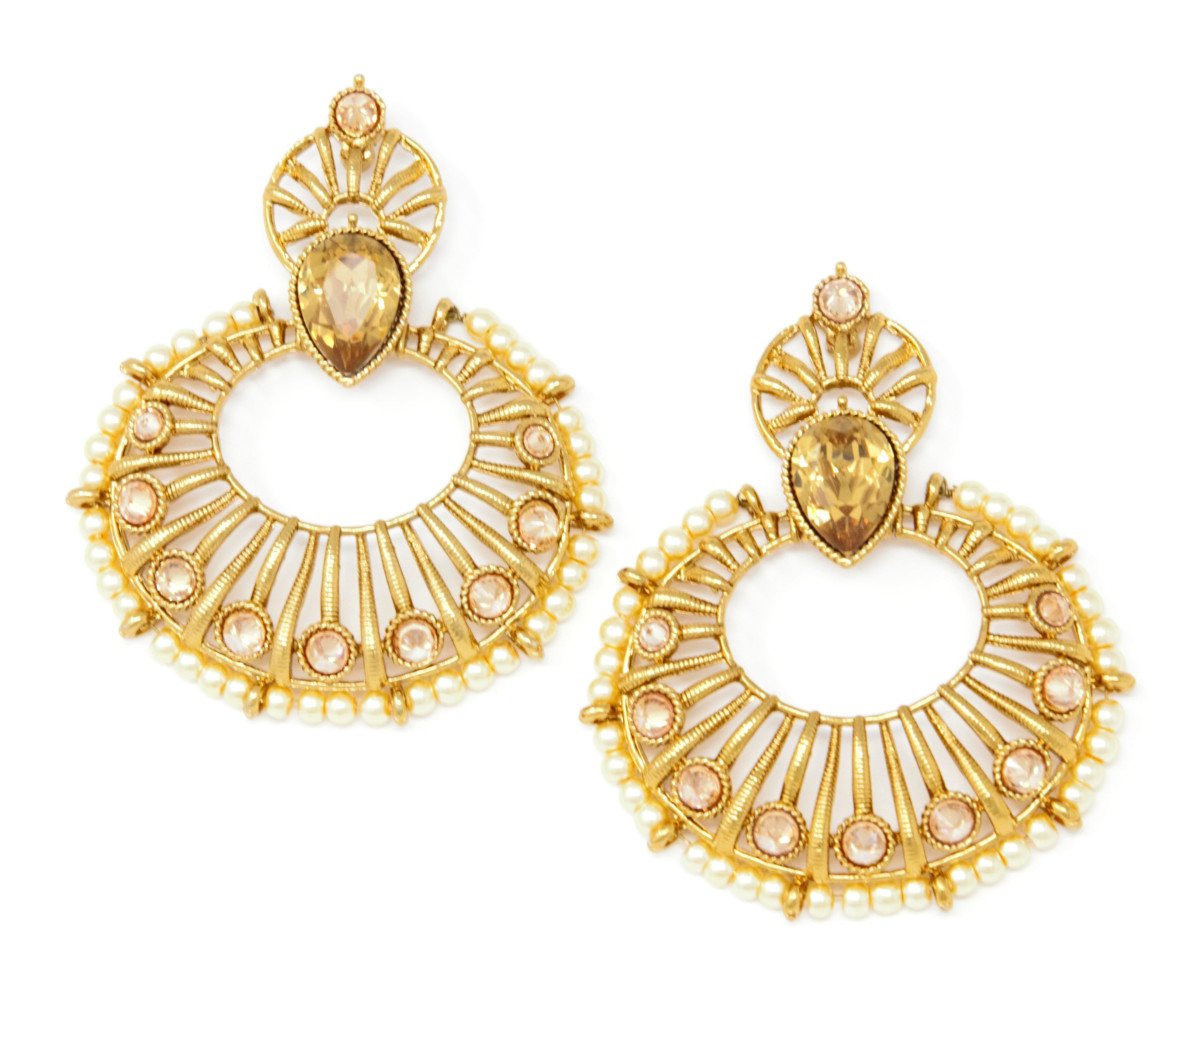 22ct Gold Chand Bali : Add a Touch of Elegance to Your Look